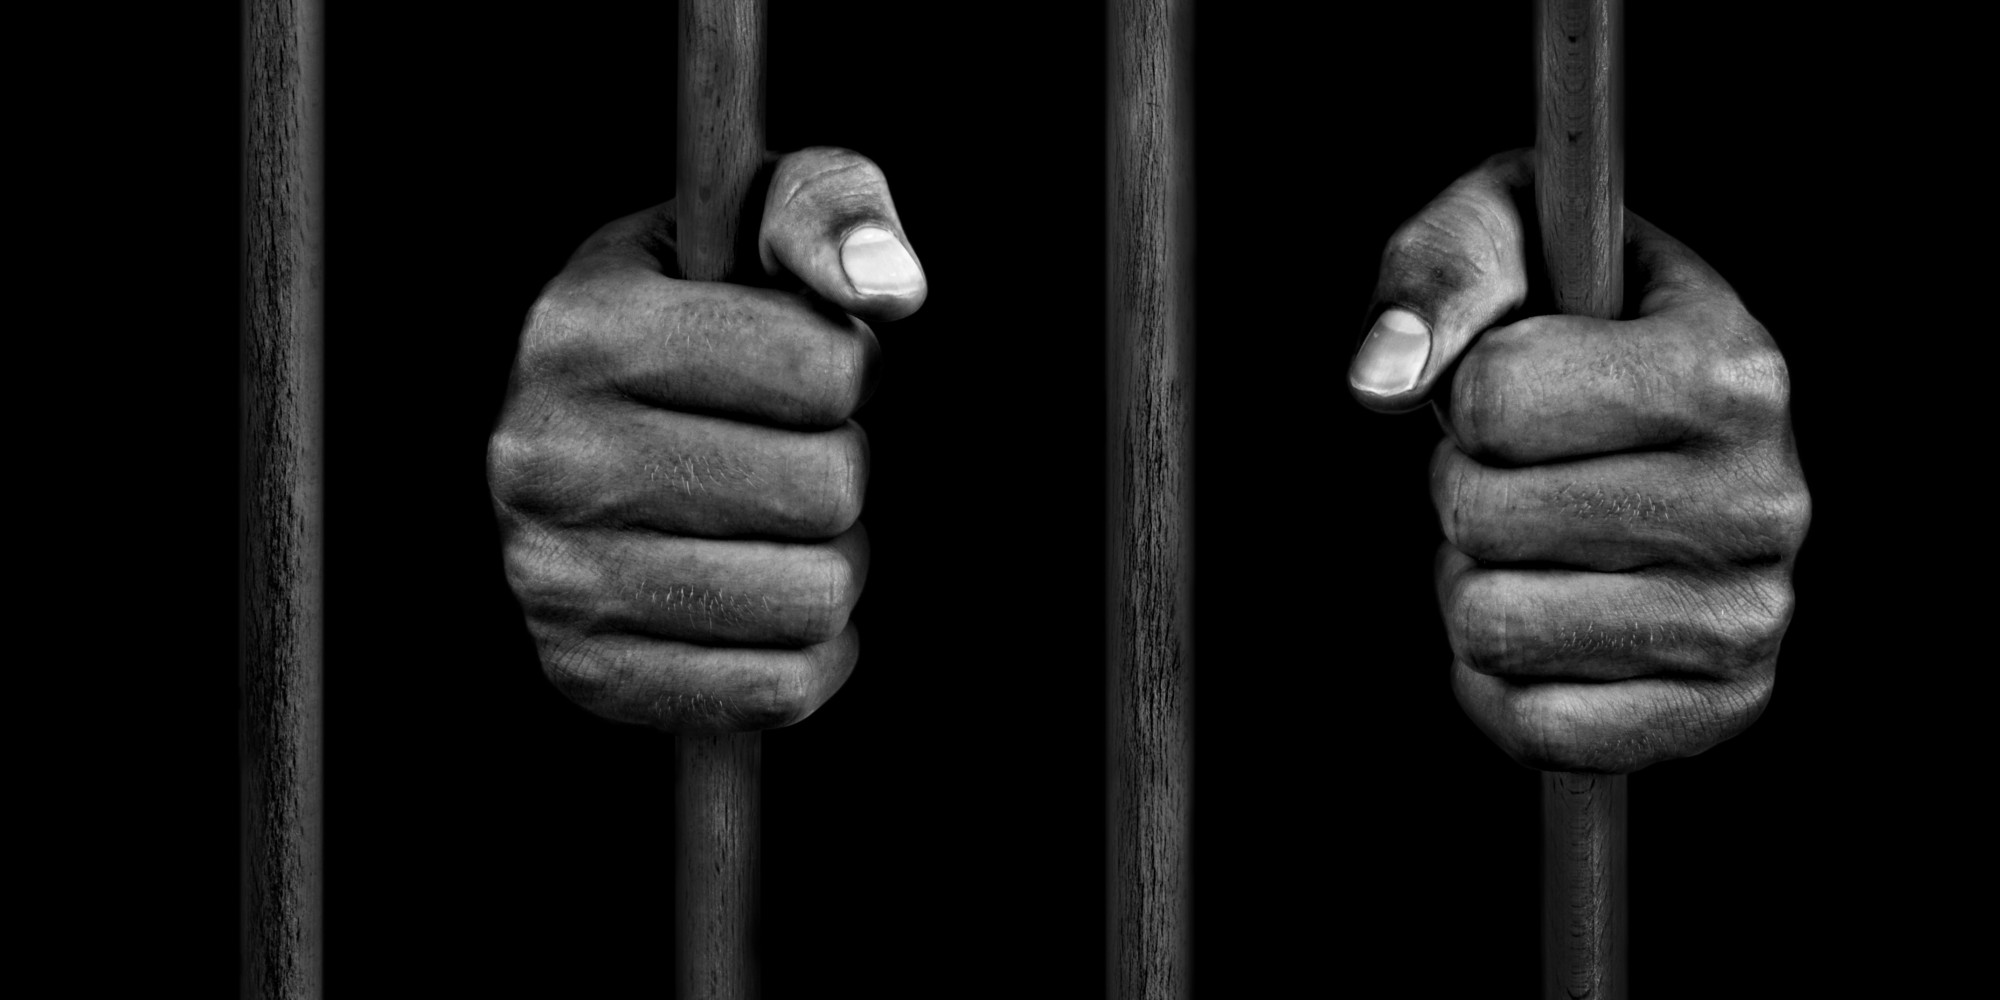 Ondo Man Sentenced For Hacking Neighbour To Death